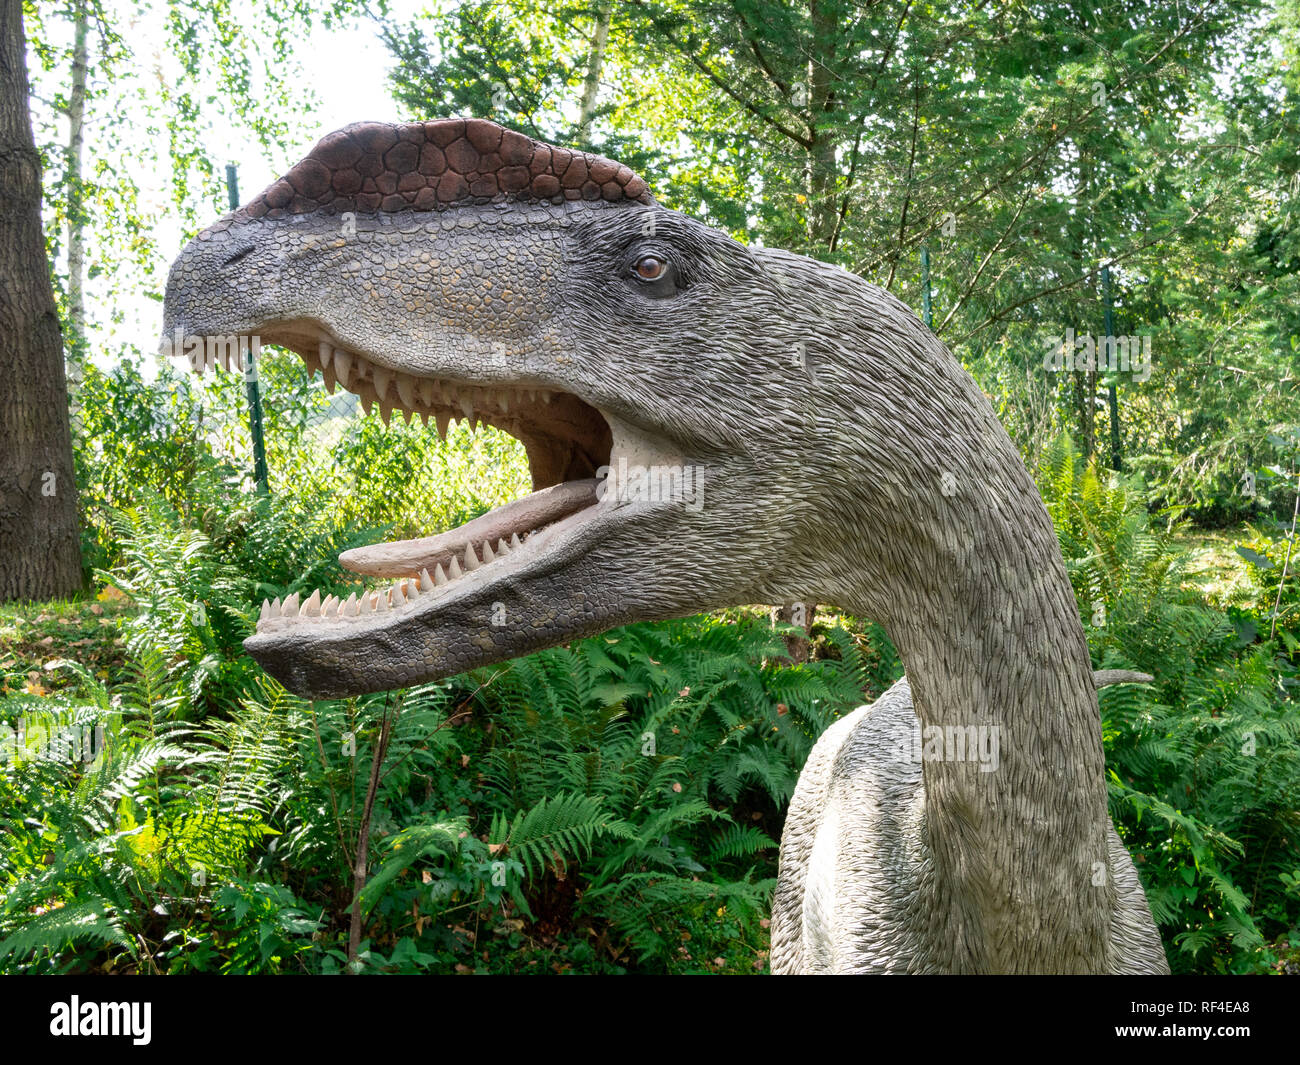 A model of predator dinosaur with green ferns and trees behind. Stock Photo